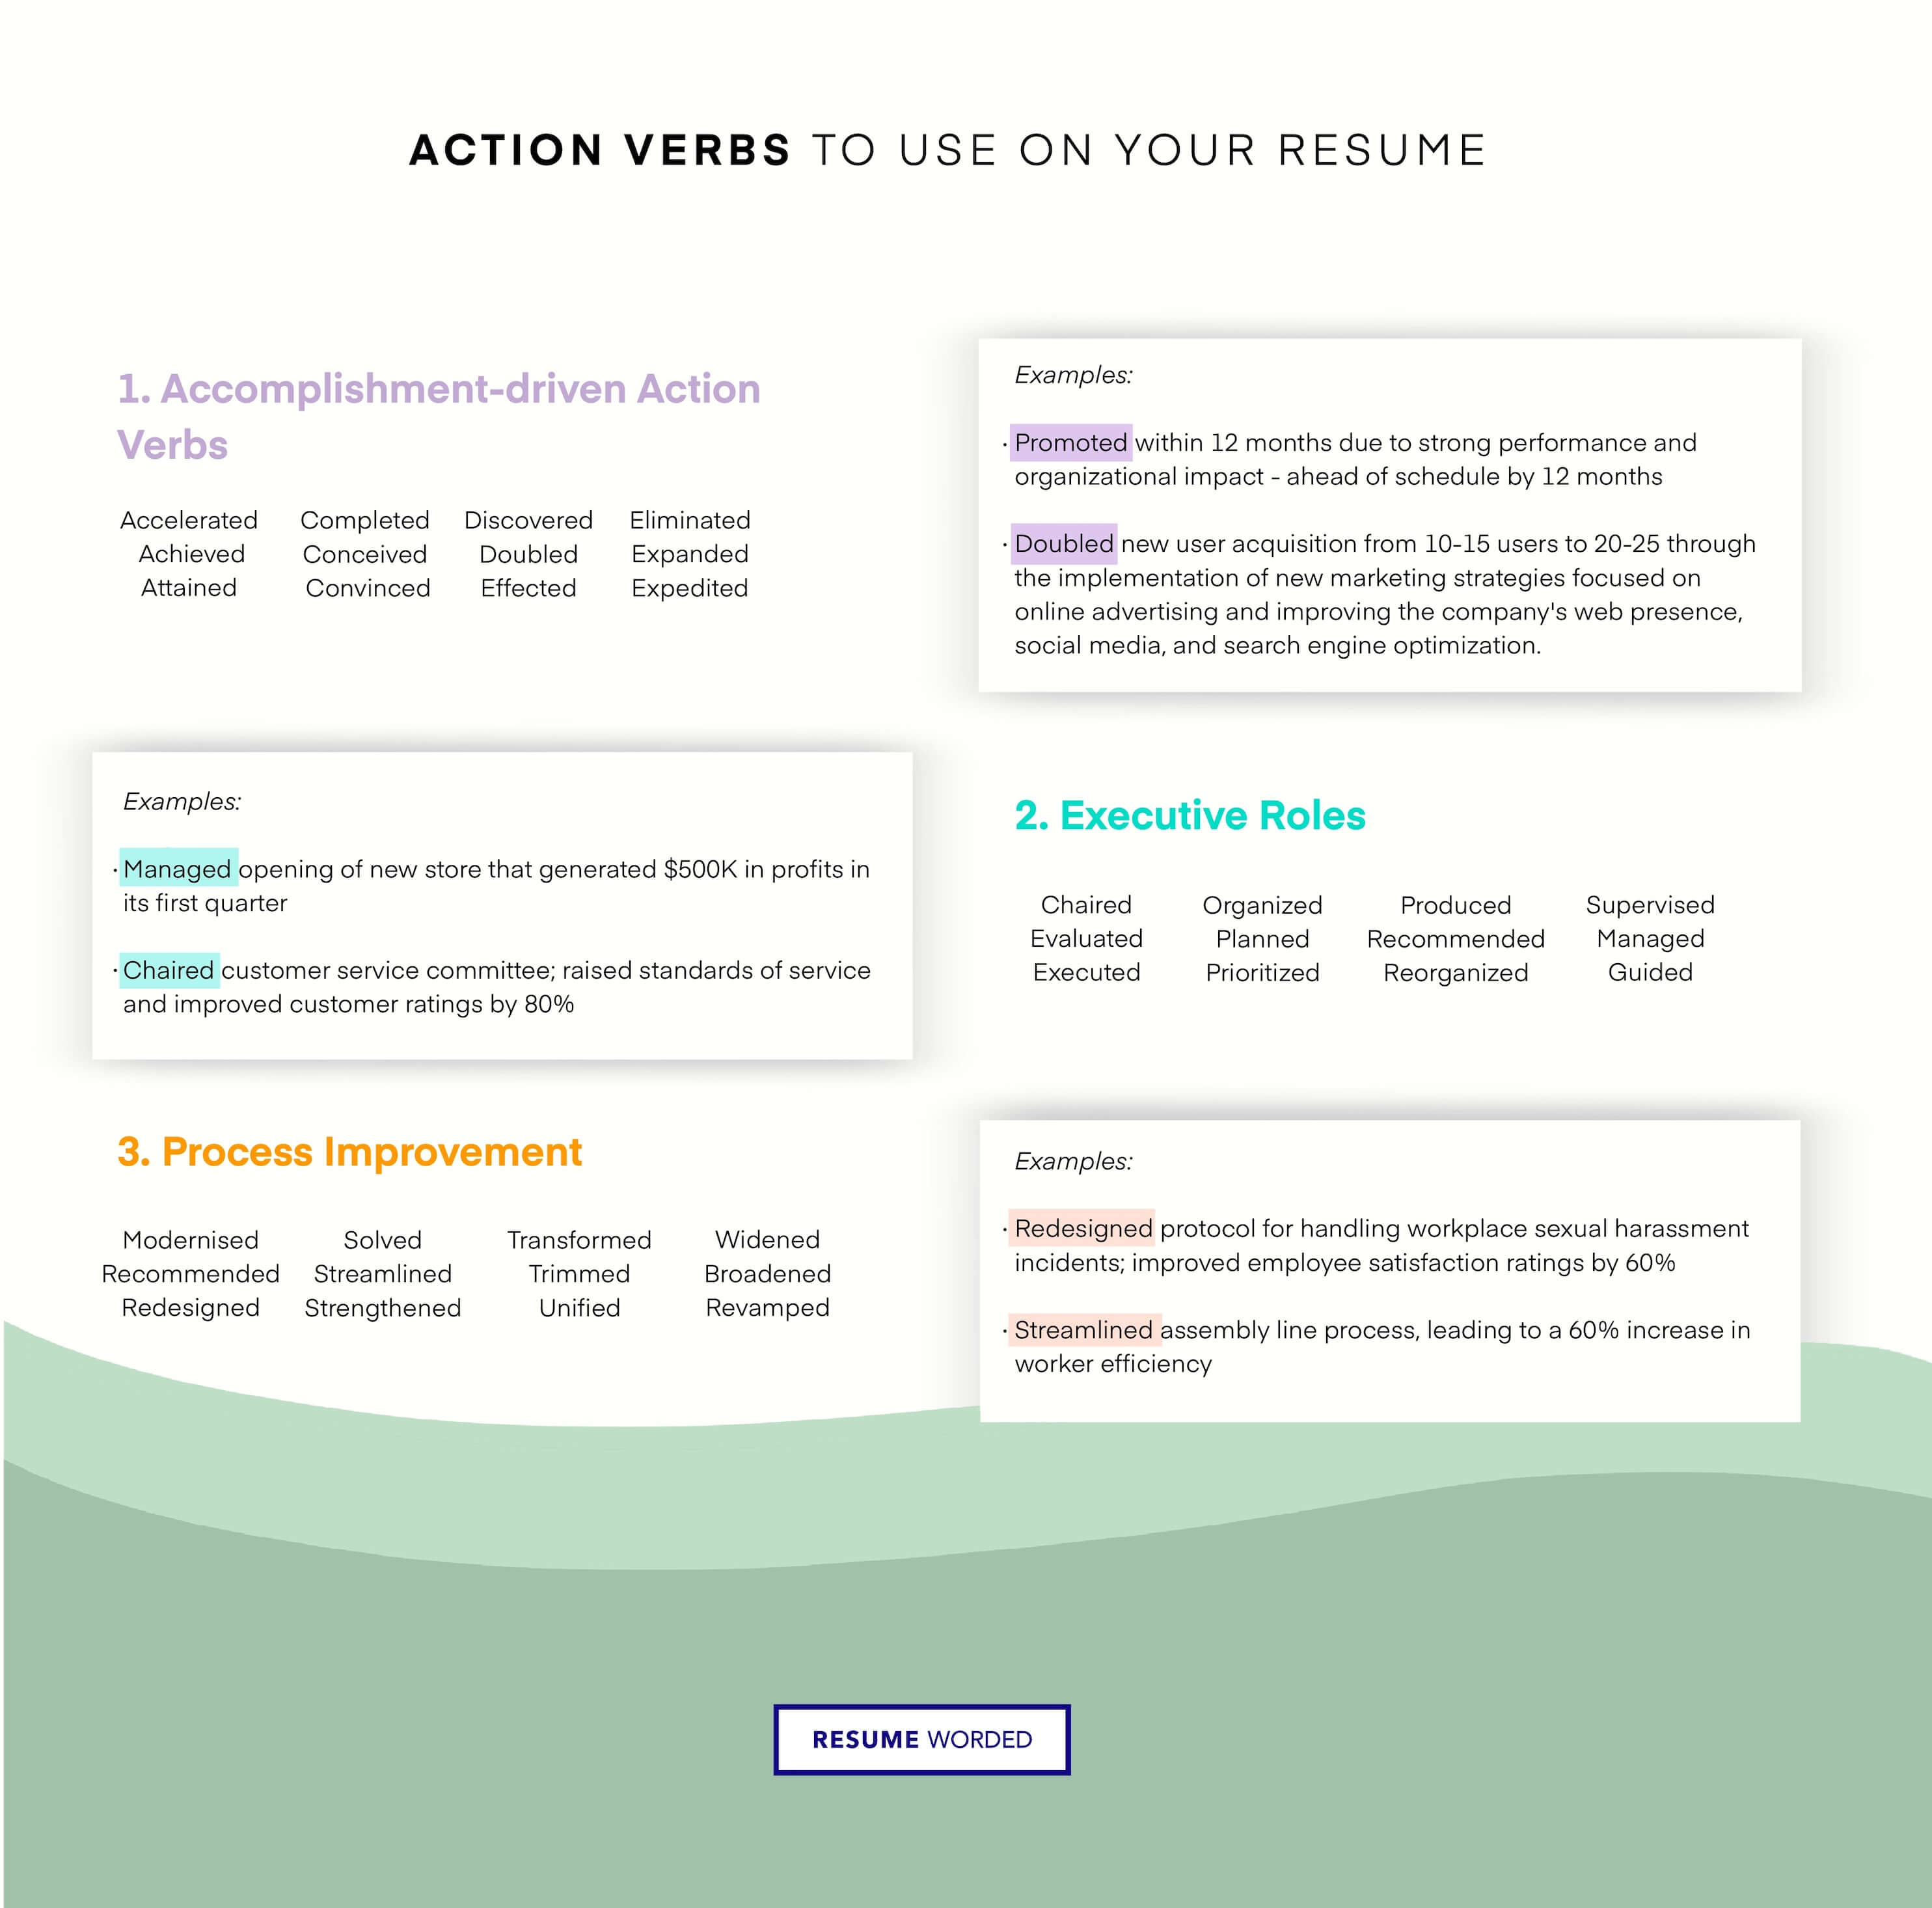 Use leadership action verbs to emphasize your leadership abilities. - VP of Sales Resume